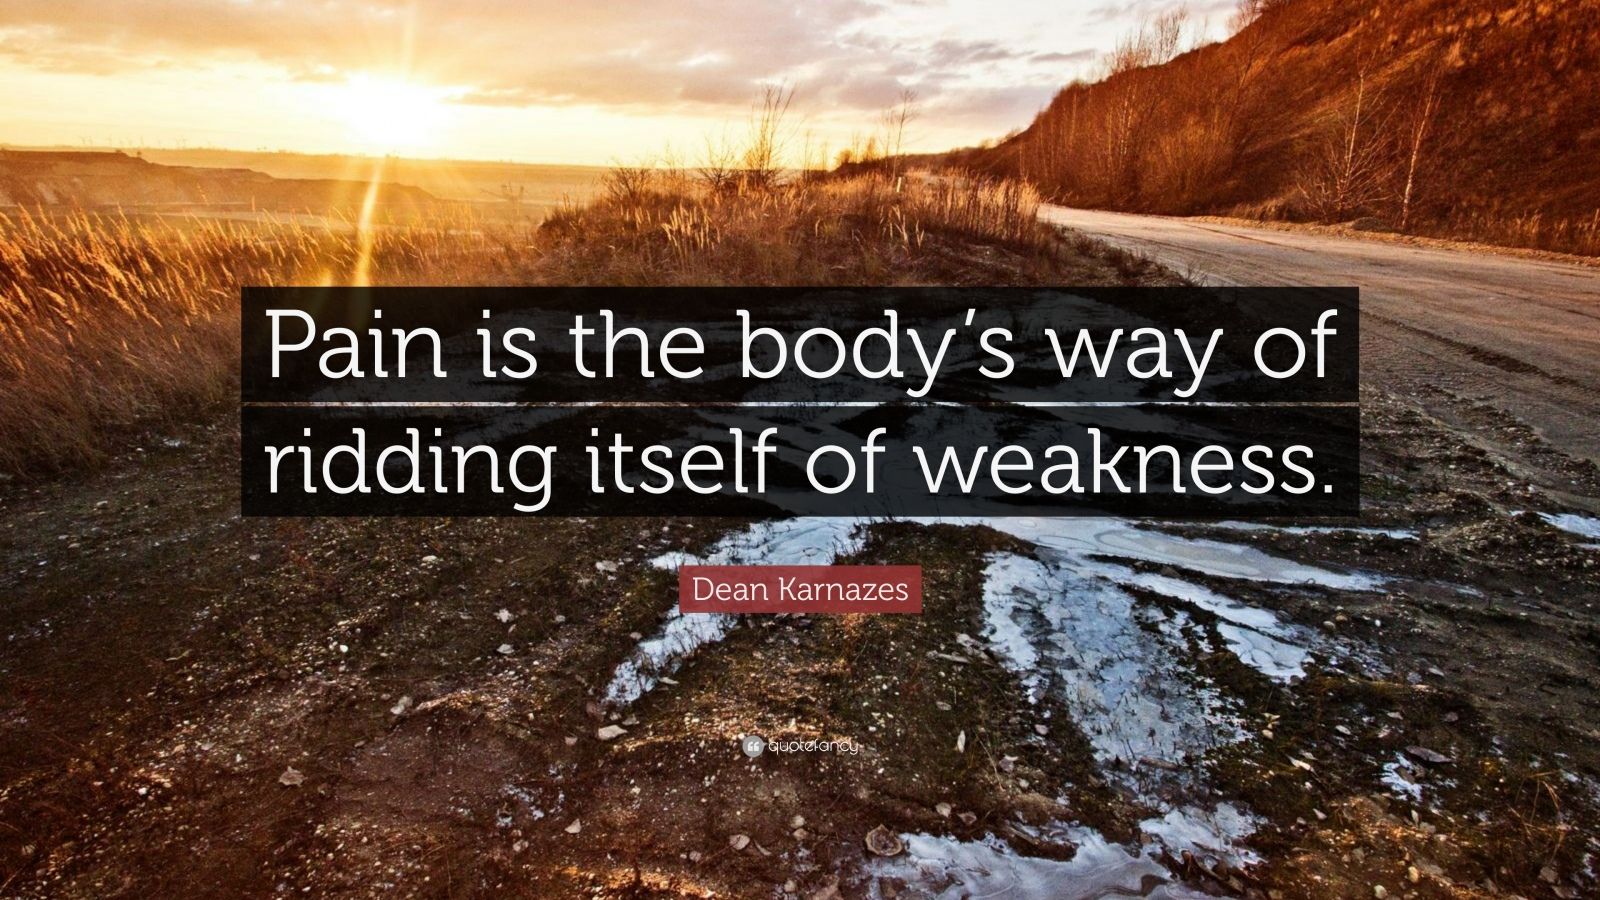 Dean Karnazes Quote: “Pain is the body's way of ridding itself of ...